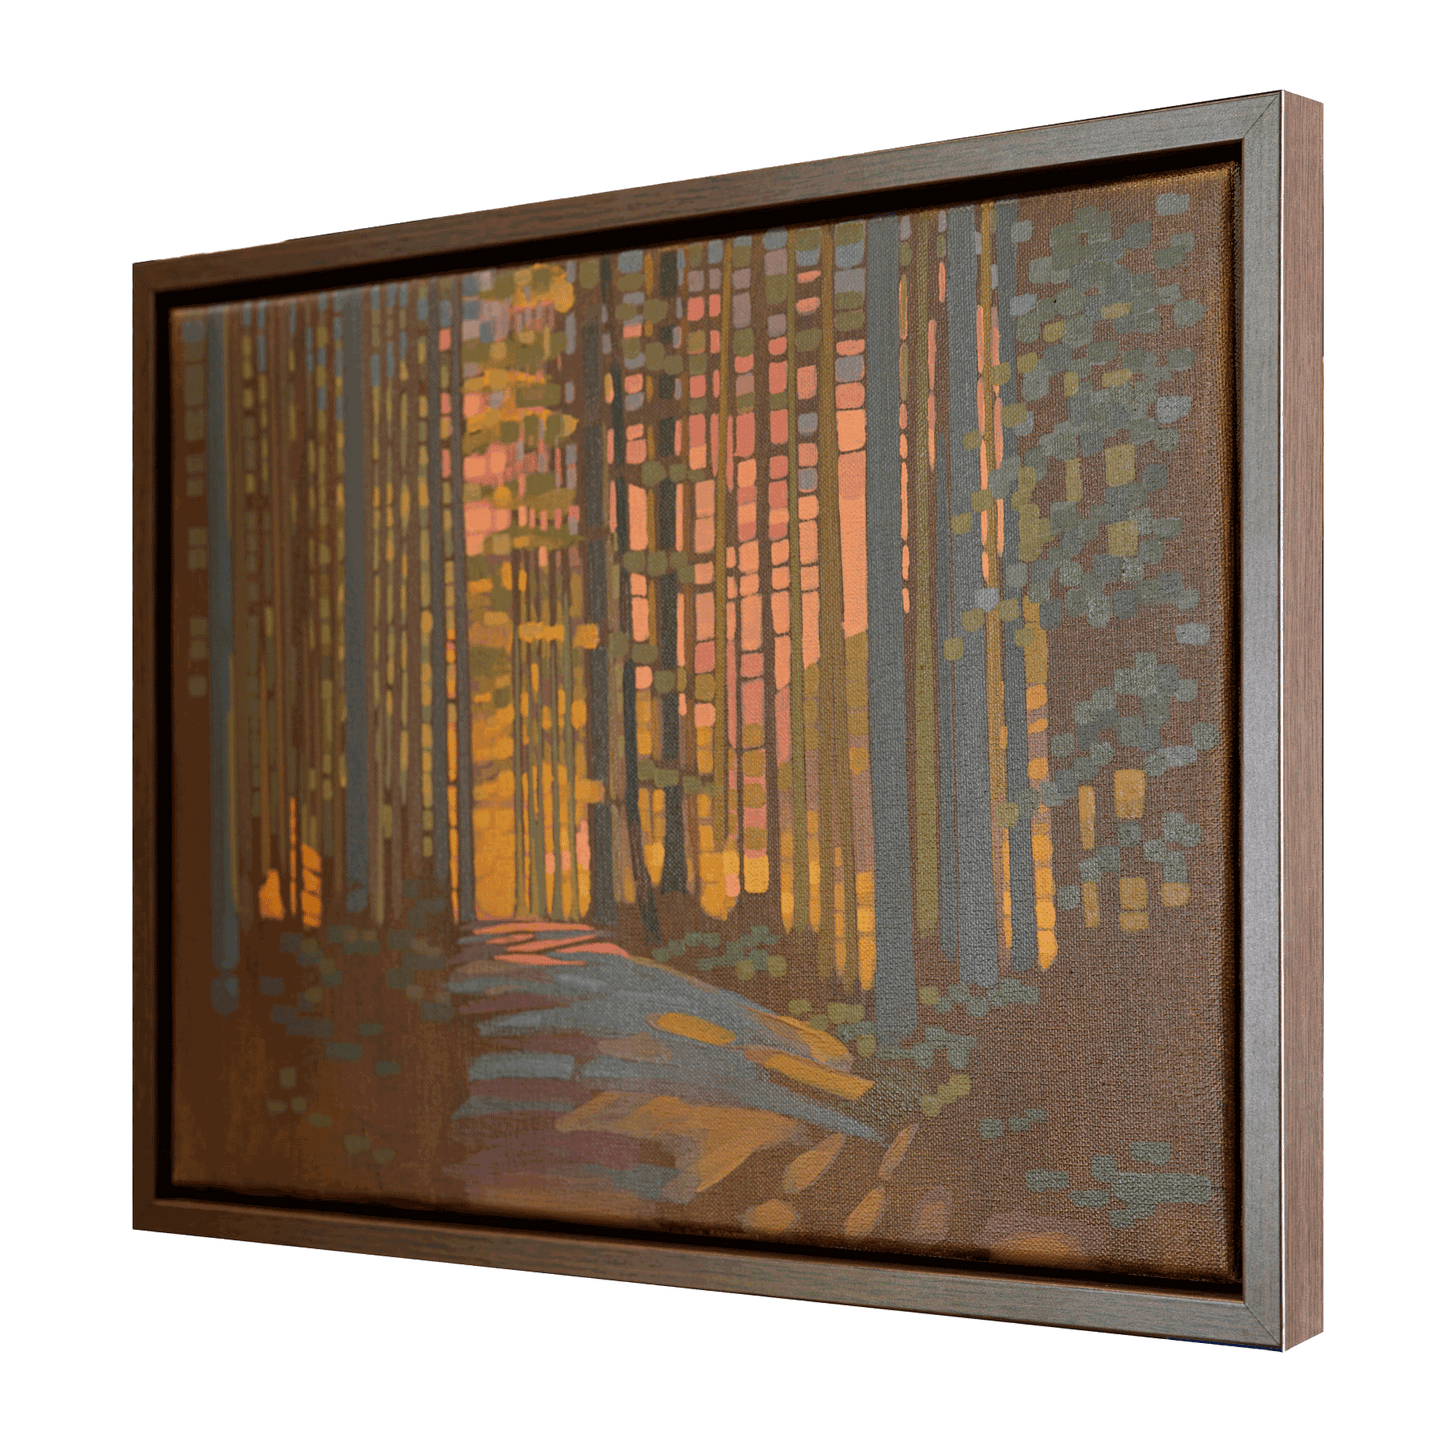 Shining forest, unique, painting, hand-painted unique piece, 40 x 30 cm, with picture frame